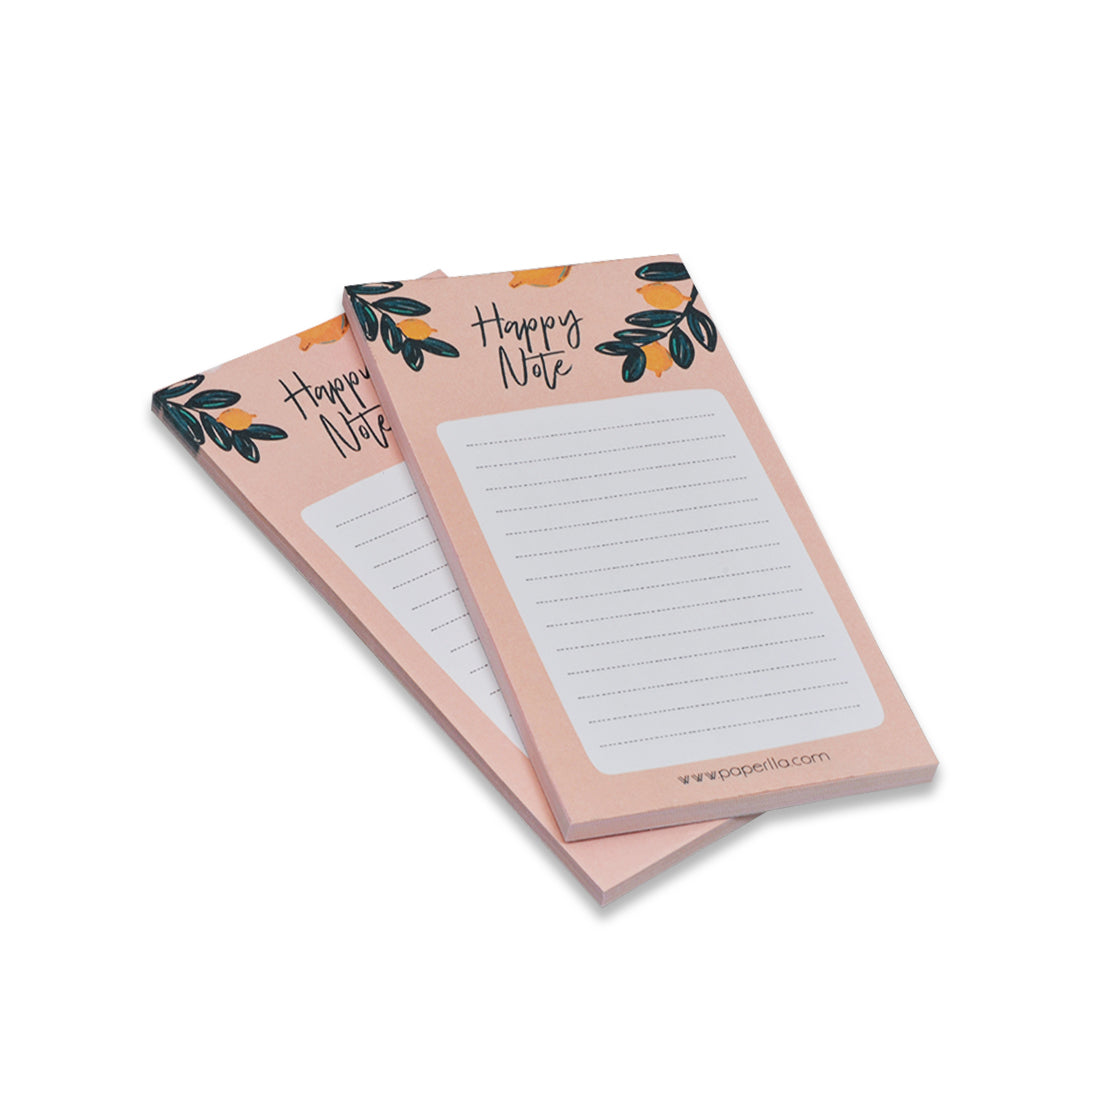 Notepad - 50 Sheets to Do Notepad Tear Off Planning Pad, Planner Checklist Organizing Pack of 8 Pads